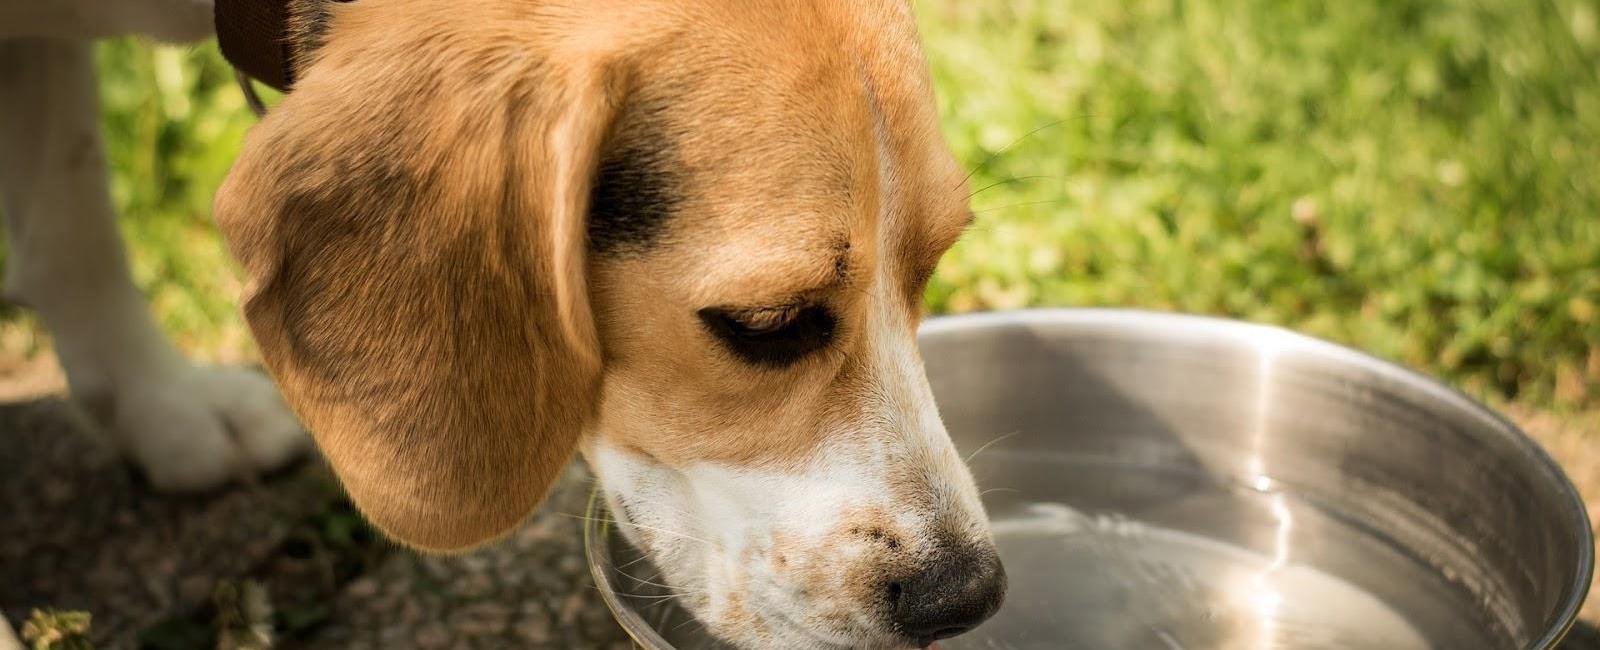 Dog Drinks Water Too Fast? Here’s How to Slow Them down a Bit